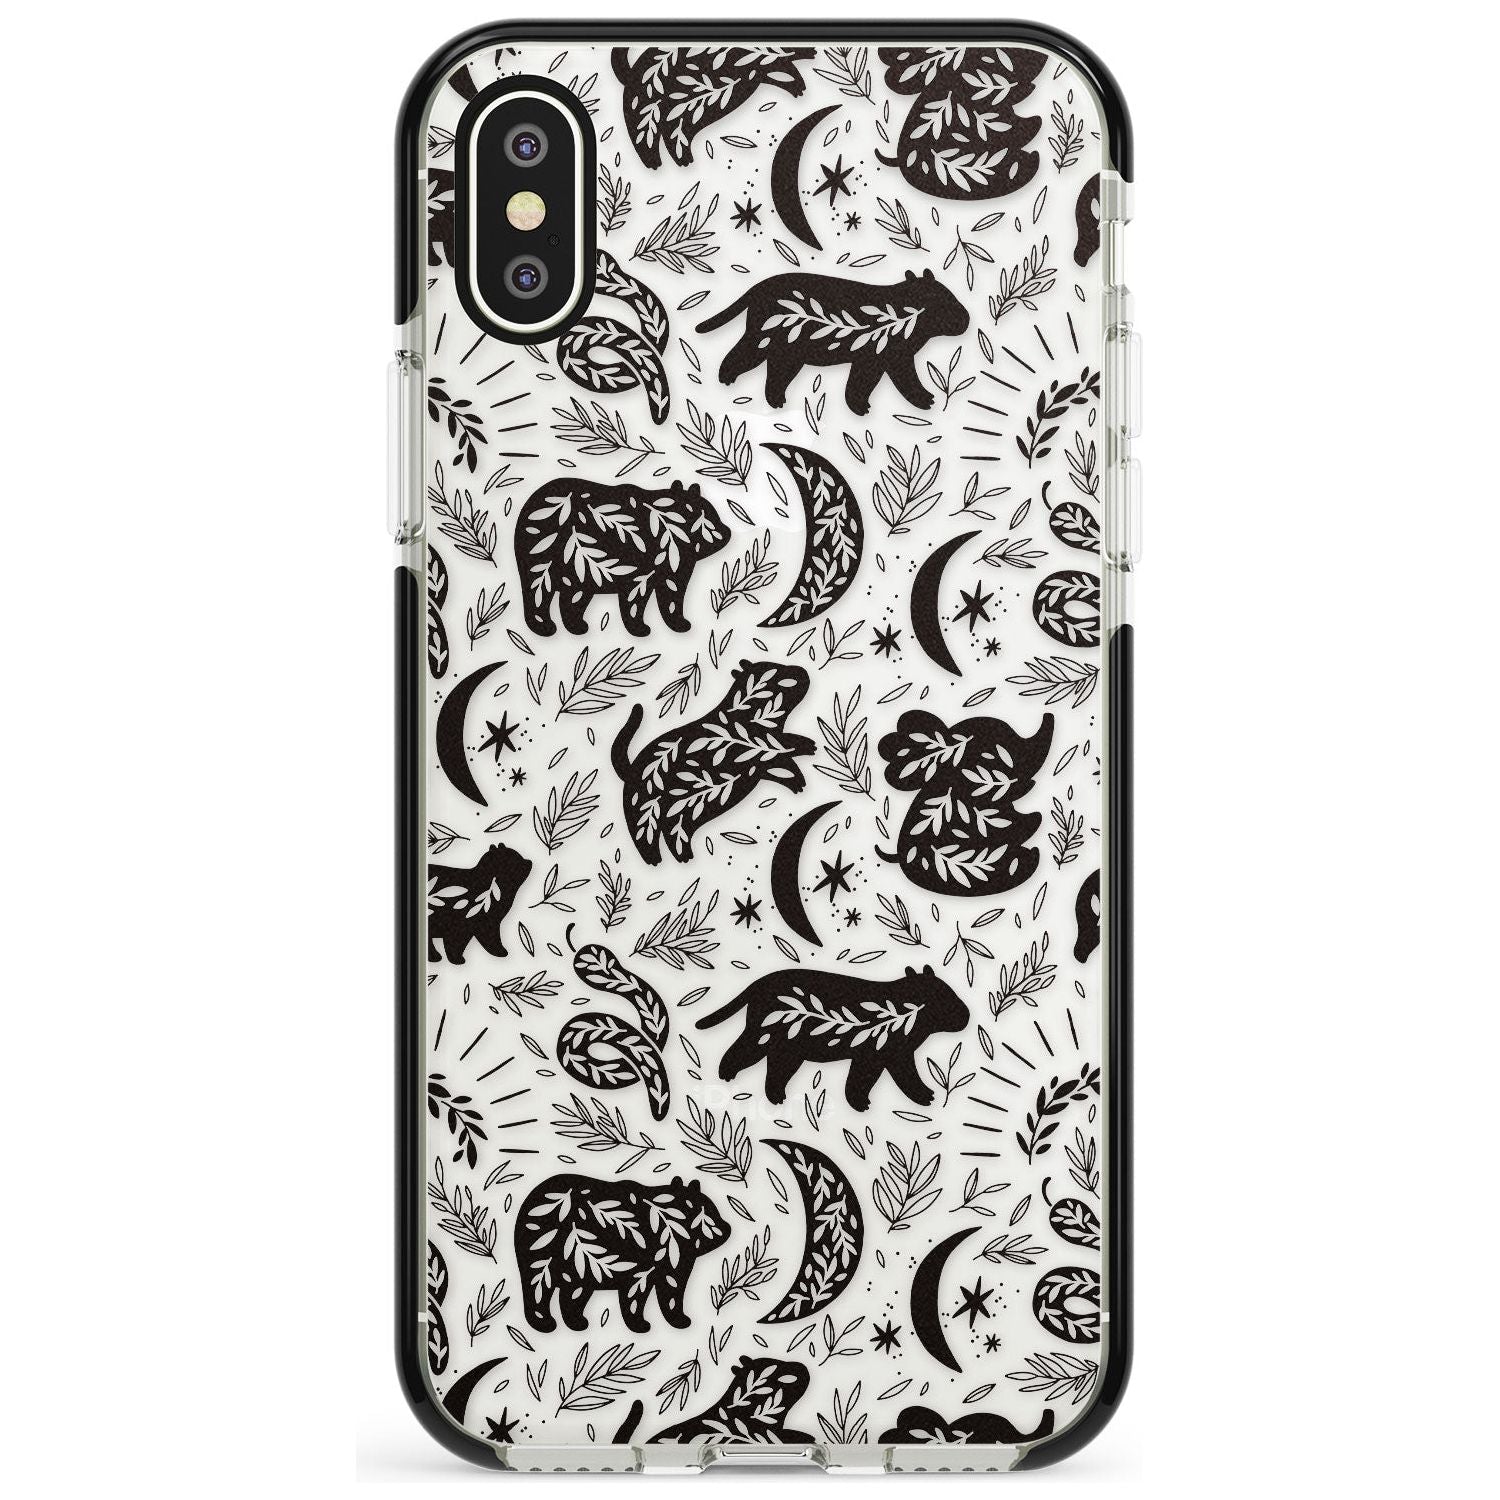 Leafy Bears Black Impact Phone Case for iPhone X XS Max XR